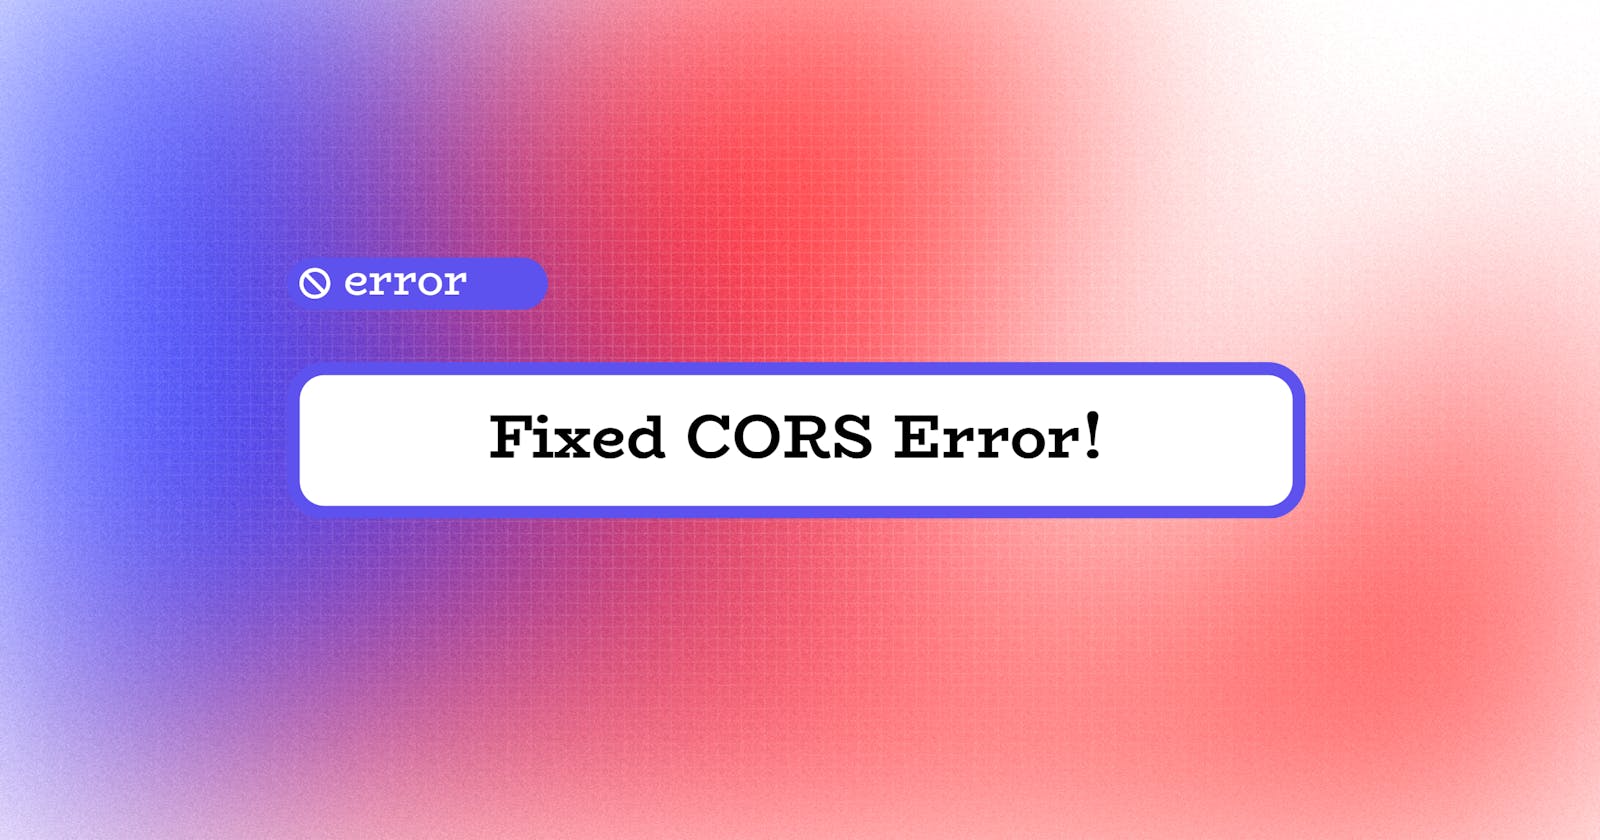 Fixed CORS error with just one line of code